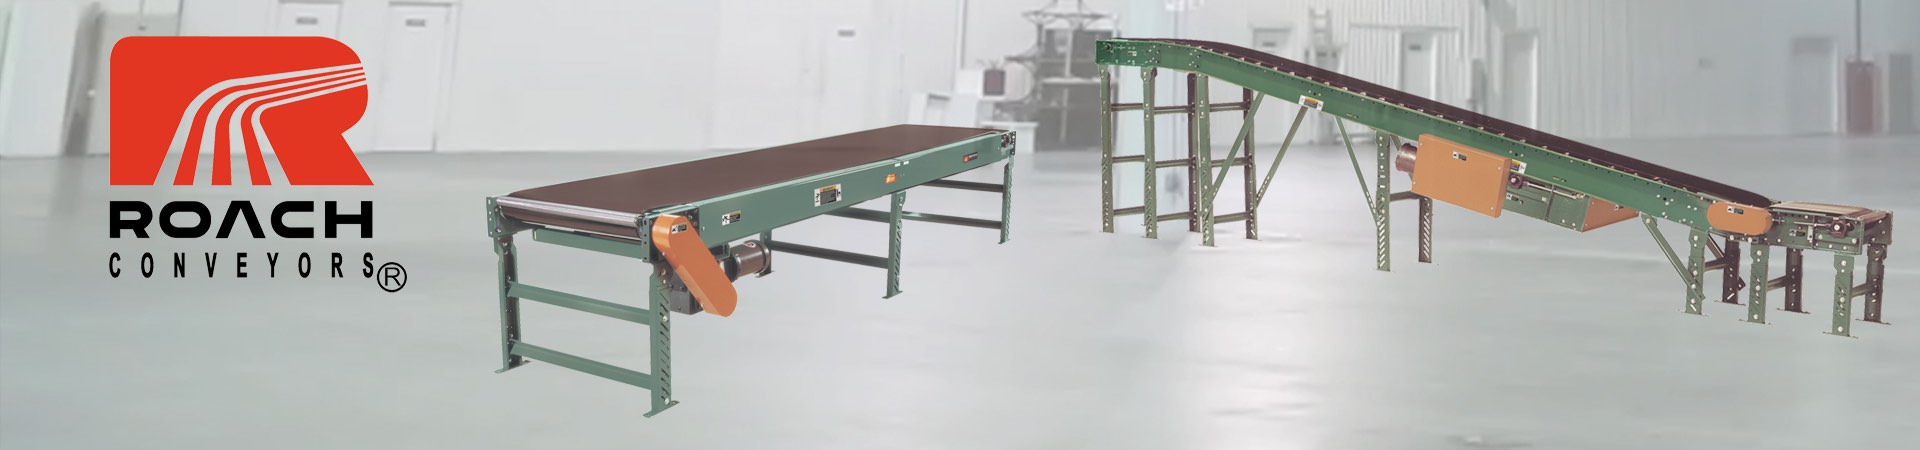 PARTNERED WITH ROACH CONVEYORS